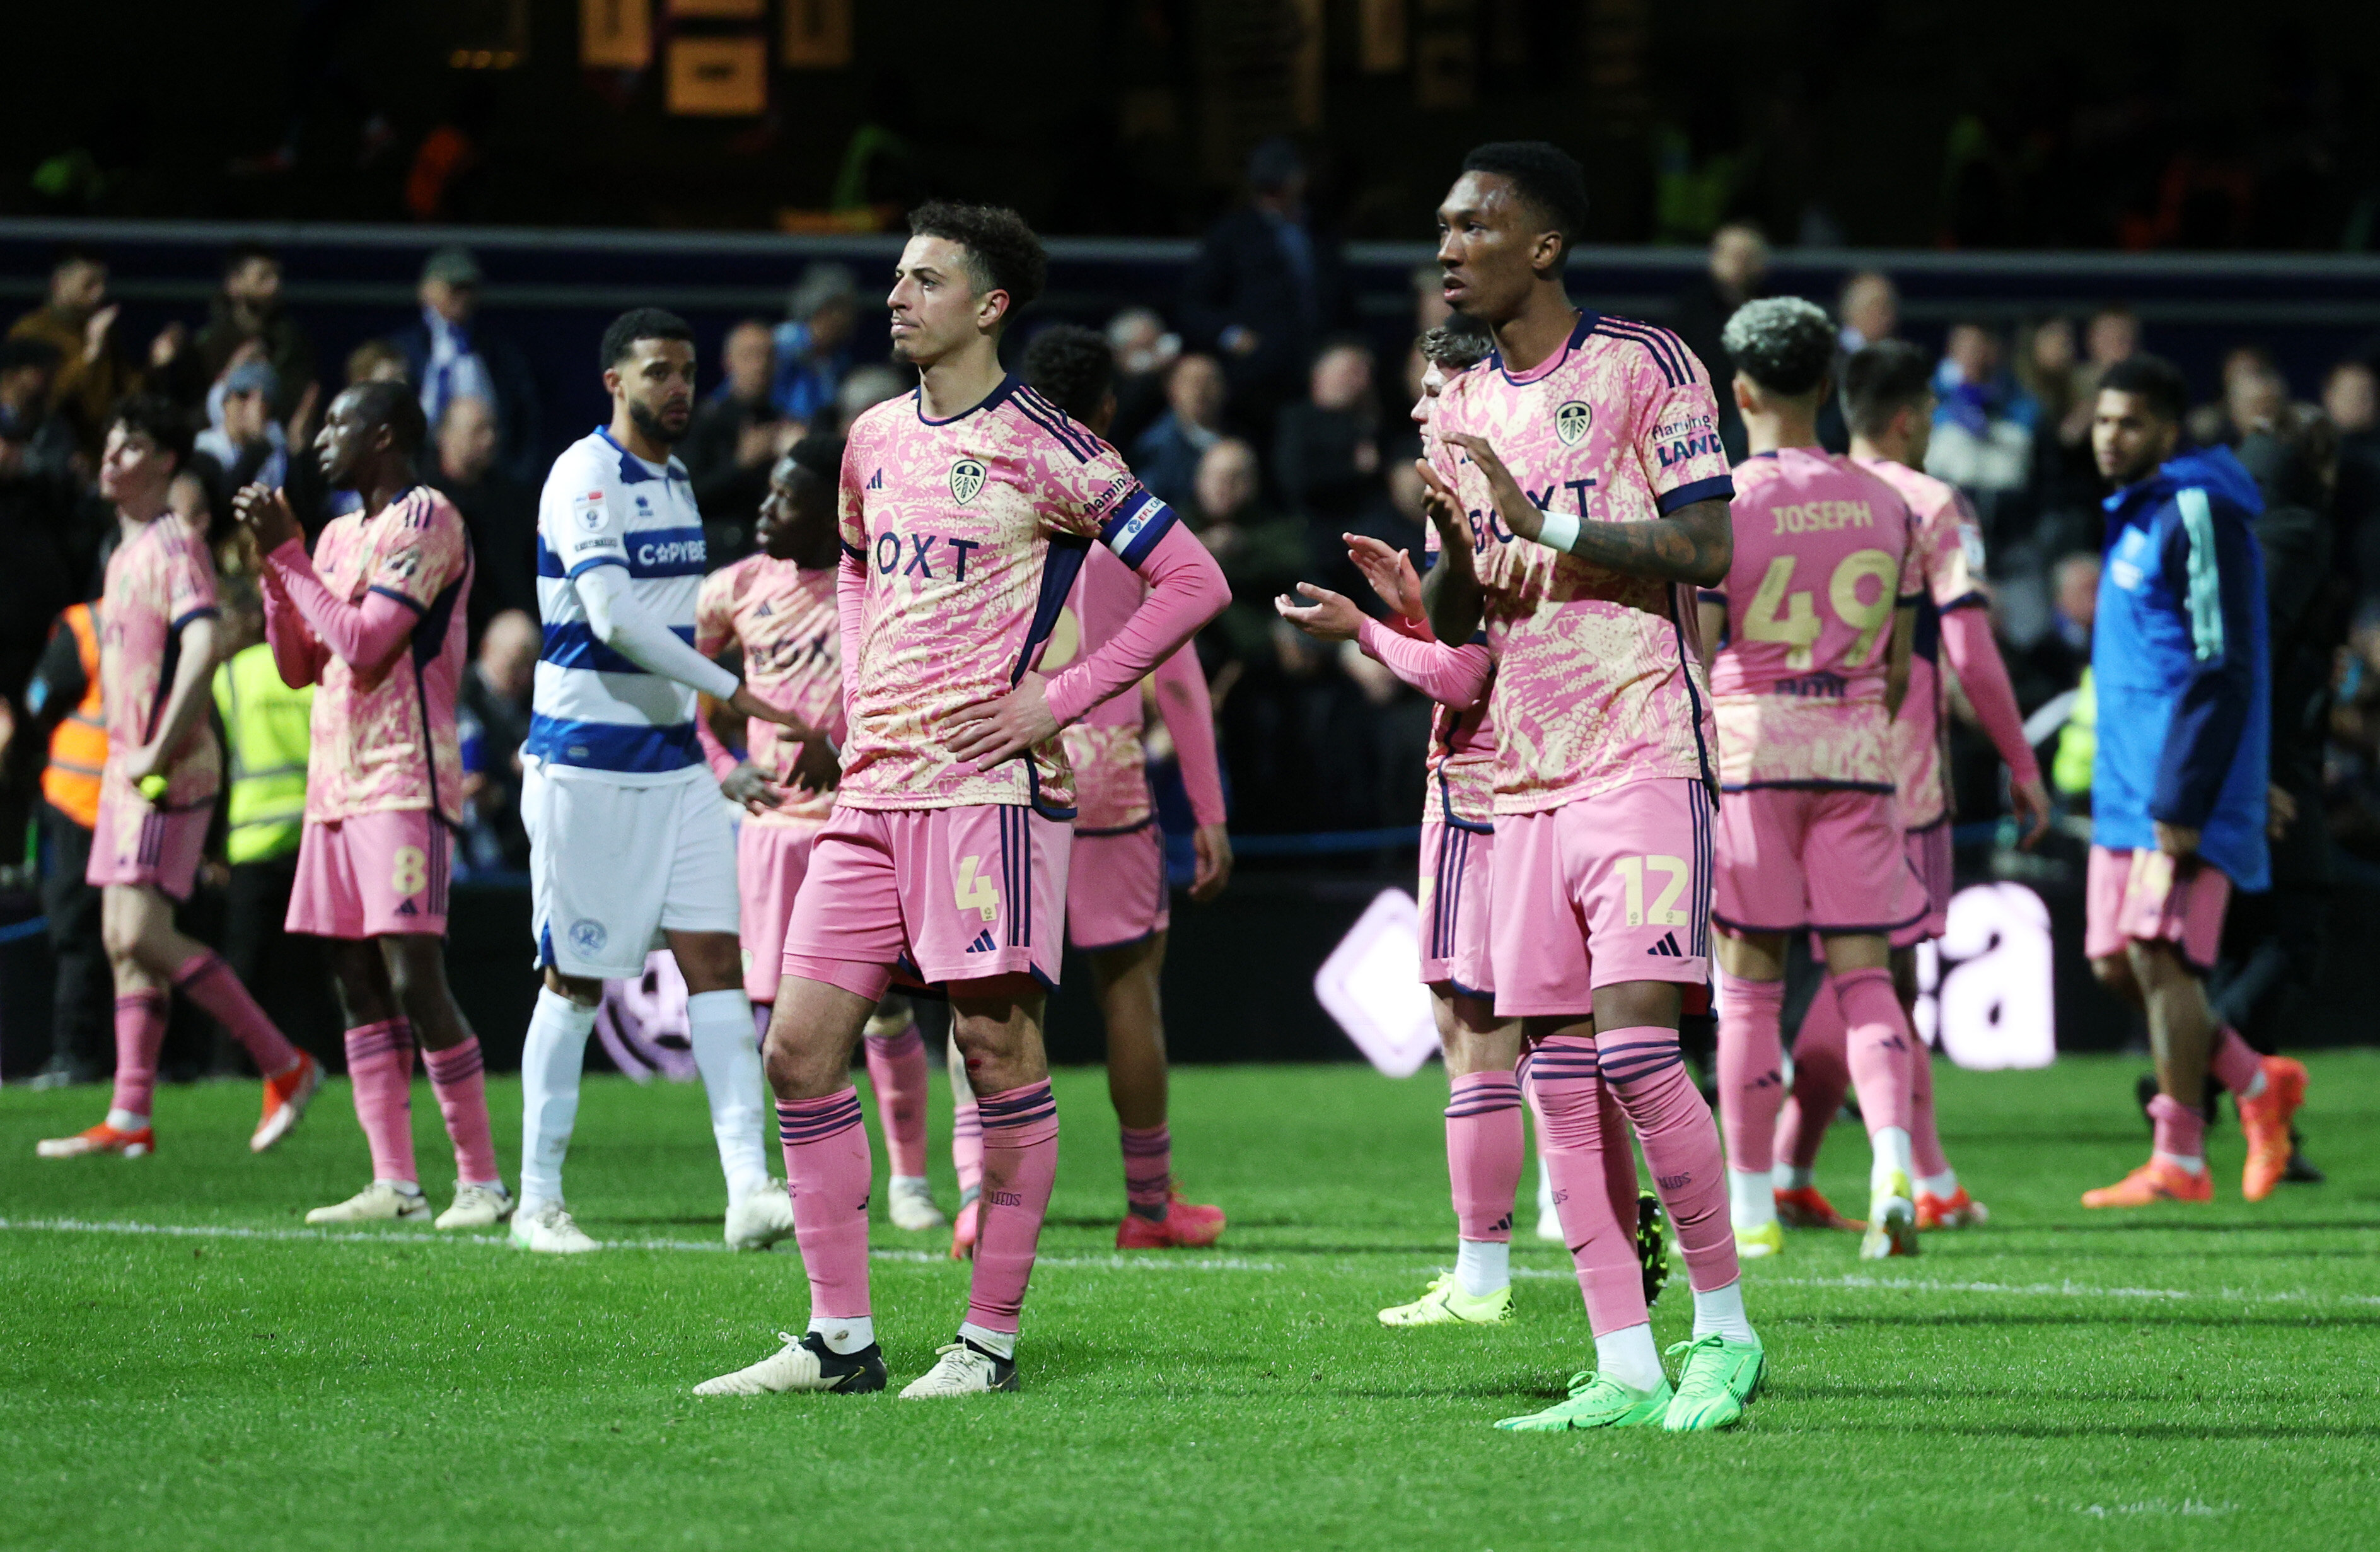 Queens Park Rangers thrash Leeds United to ensure Championship safety and confirm Leicester City's promotion to the Premier League